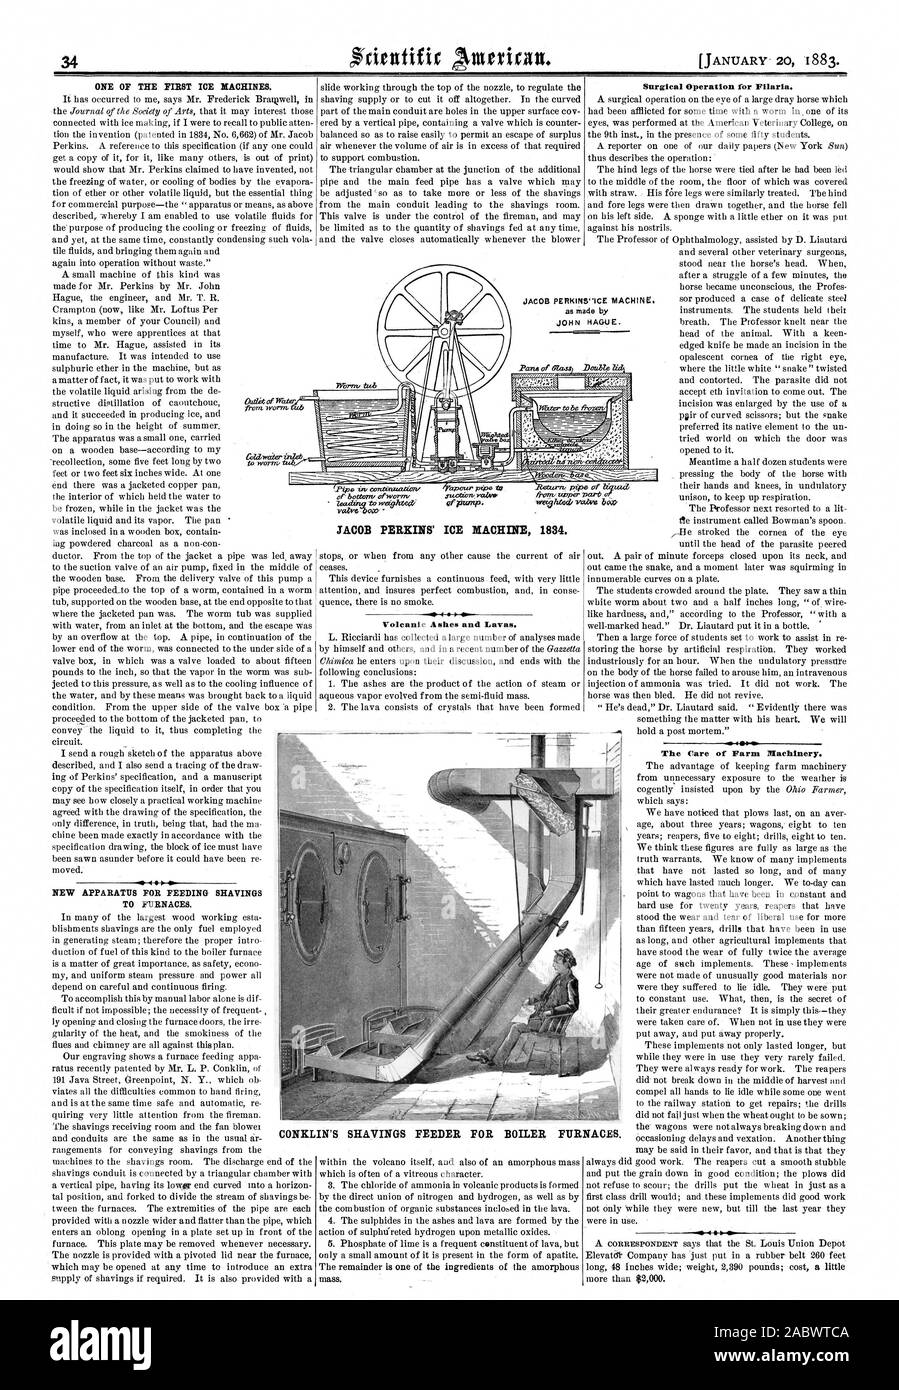 ONE OF THE FIRST ICE MACHINES. NEW APPARATUS FOR FEEDING SHAVINGS TO FURNACES. JACOB PERKINS' ICE MACHINE 1834. Volcanic Ashes and Lavas. Surgical Operation for Filaria. The Care of Farm Machinery. 461 4 BOILER FURNACES., scientific american, 1883-01-20 Stock Photo